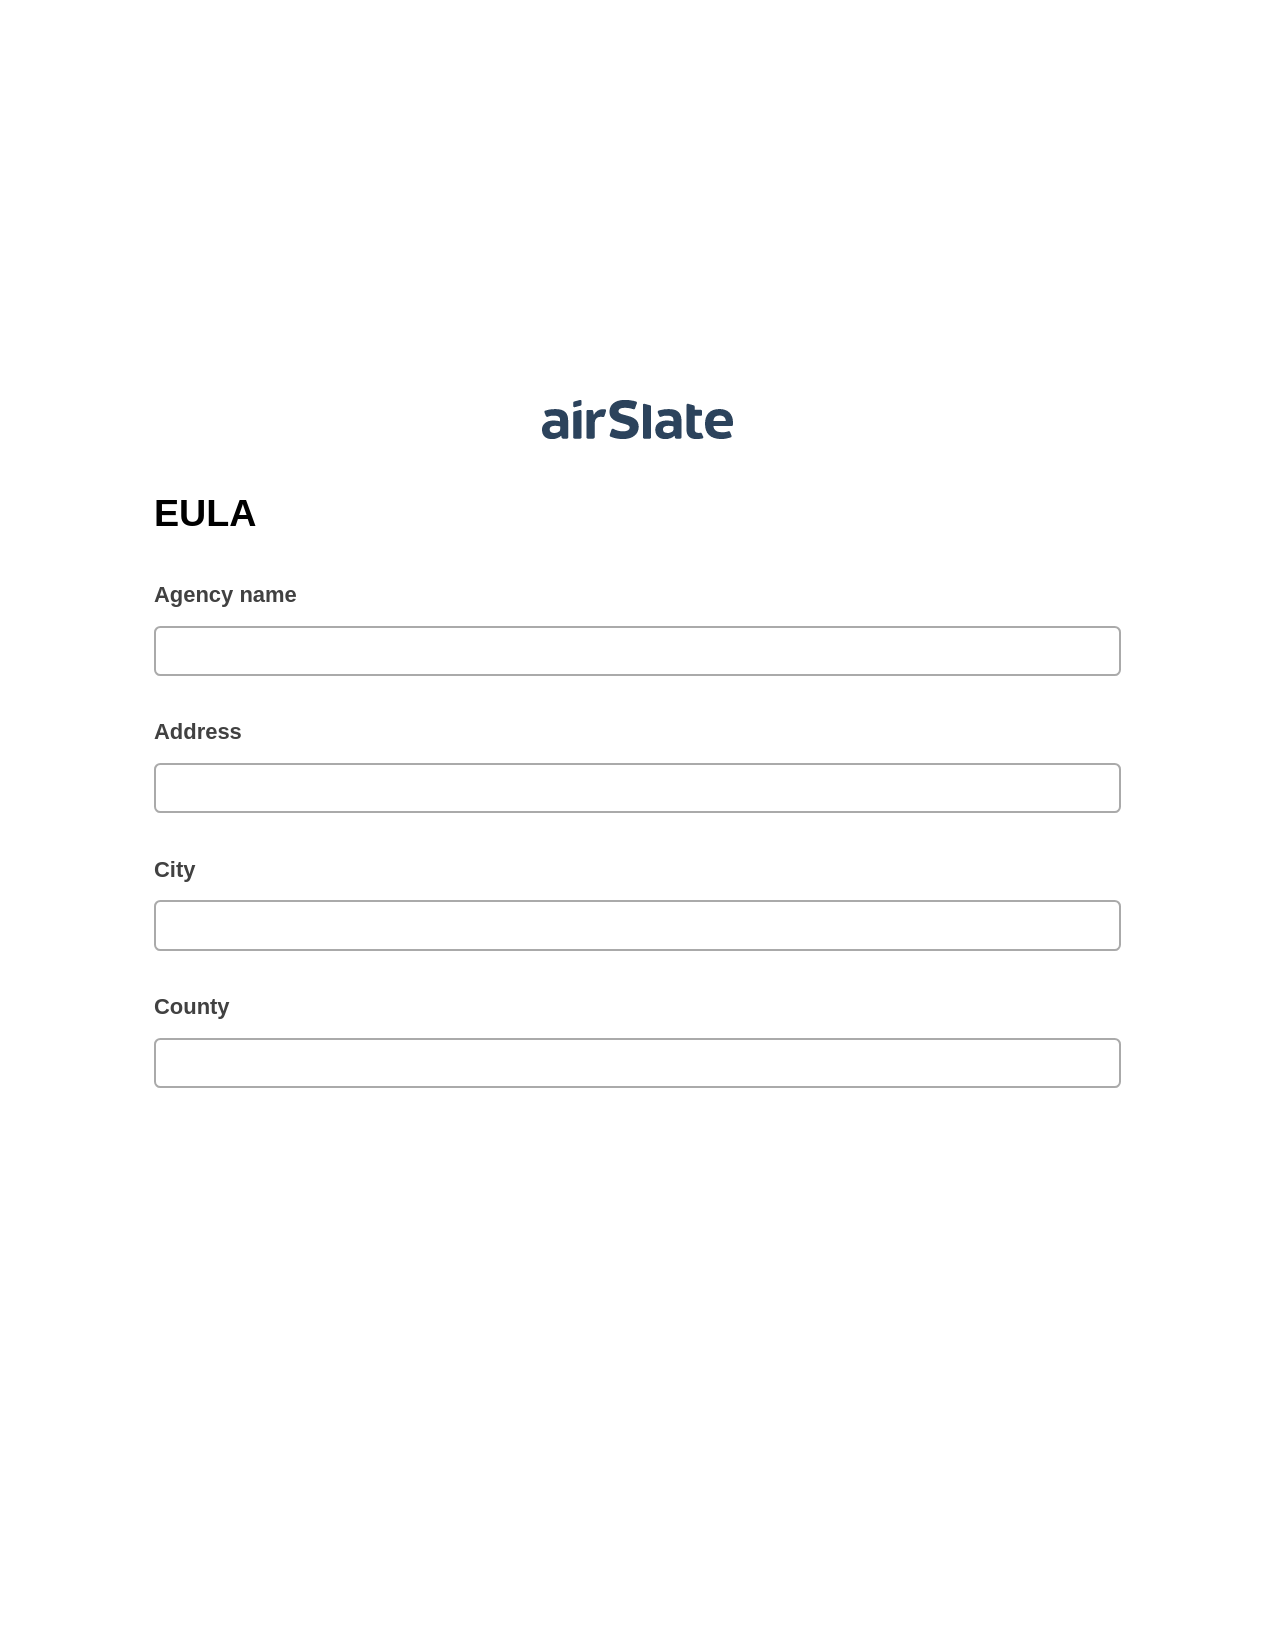 EULA Pre-fill from CSV File Dropdown Options Bot, Remove Slate Bot, Export to Salesforce Bot